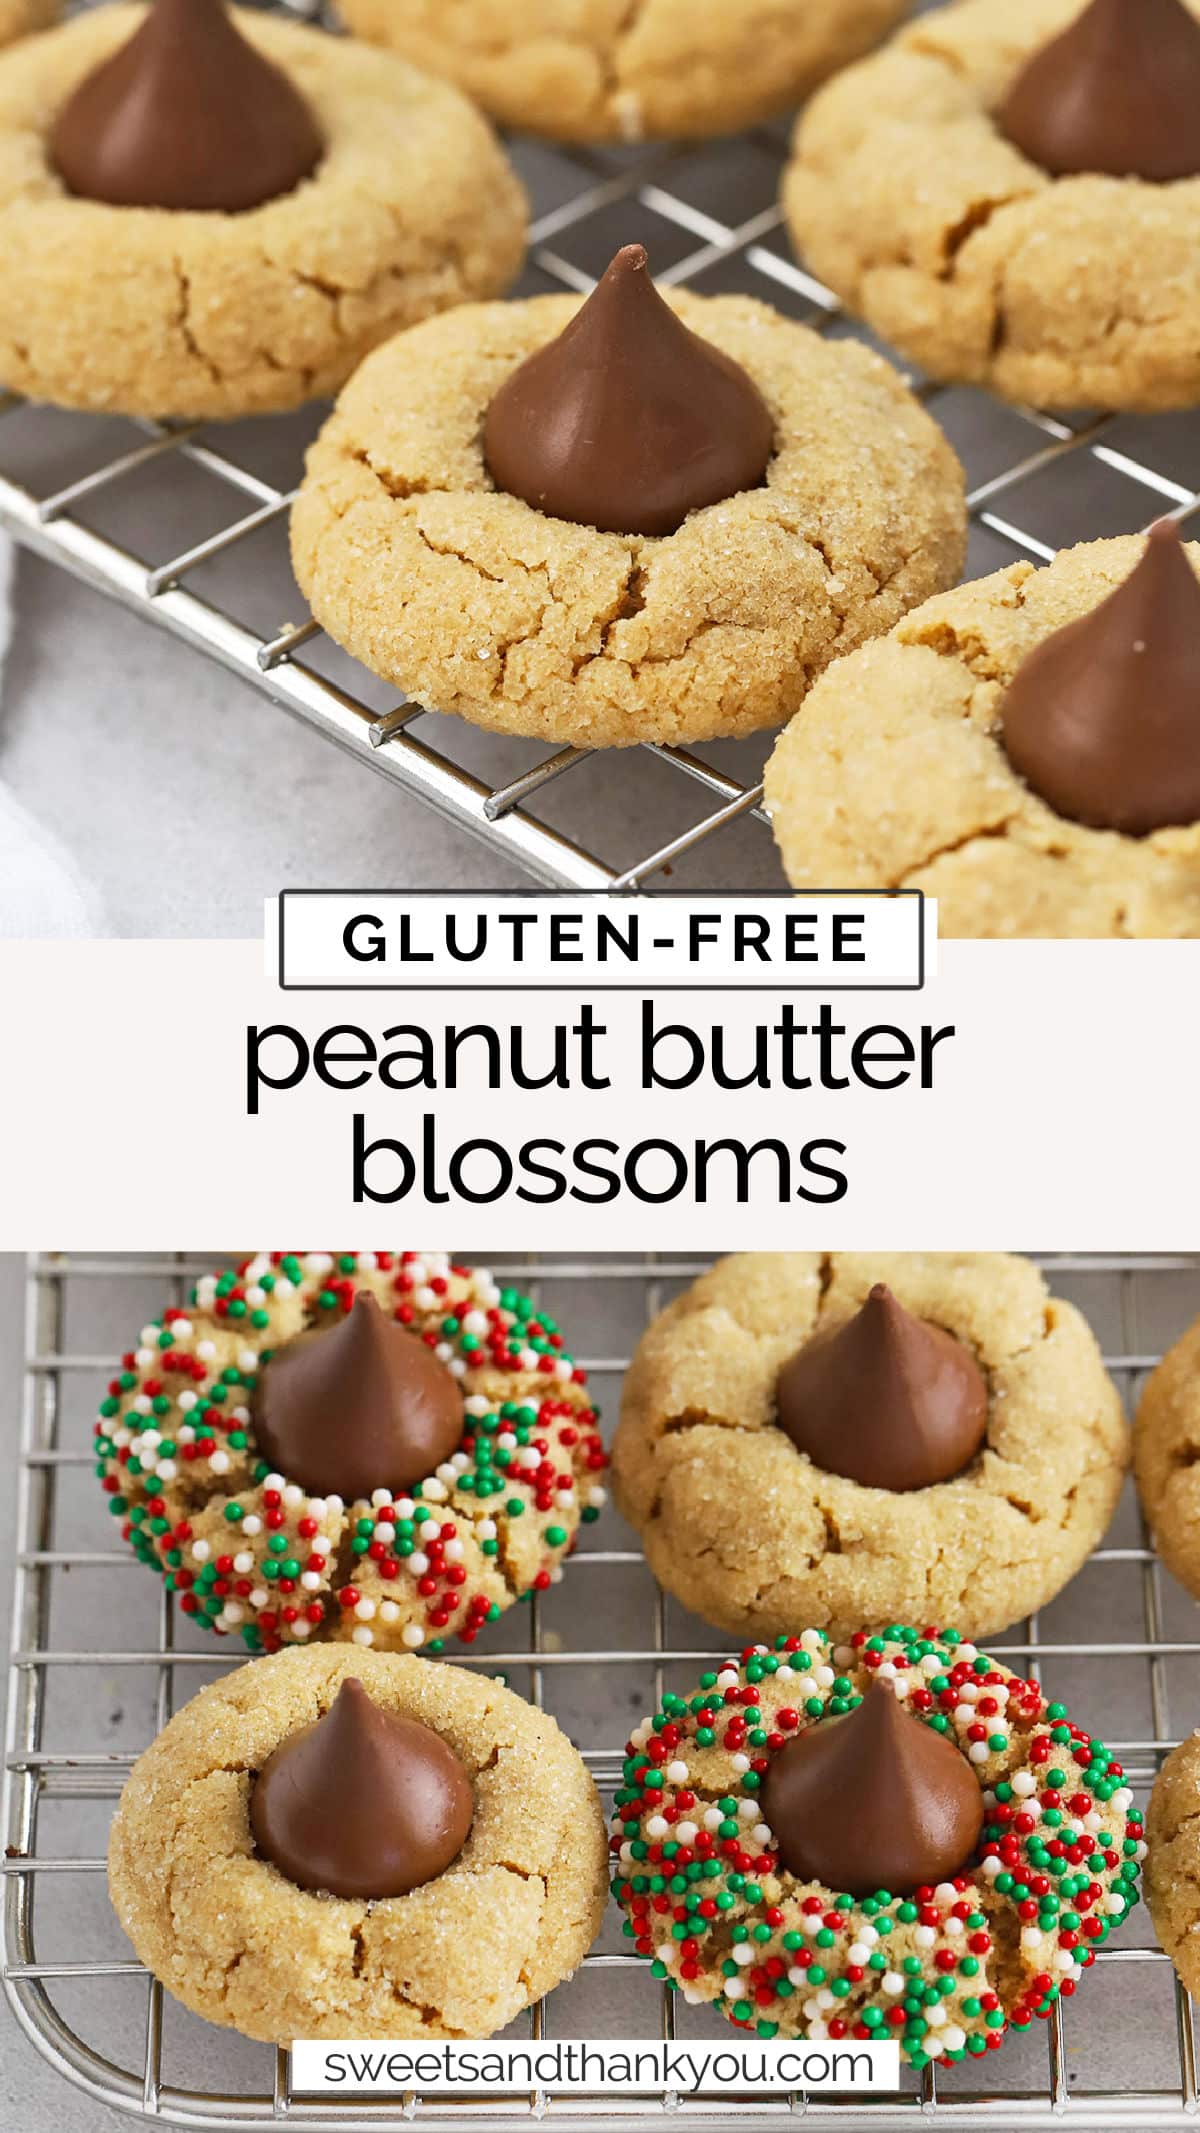 Gluten-Free Peanut Butter Blossoms - This gluten-free peanut butter blossom recipe combines soft, chewy peanut butter cookies with chocolate kiss candies. // gluten free peanut butter blossoms recipe / easy gluten-free peanut butter blossom cookies / gluten-free christmas cookies / gluten-free holiday cookies / gluten-free blossom cookies / gf peanut butter blossoms recipe / the best gluten-free peanut butter blossoms / gluten-free cookie exchange recipes